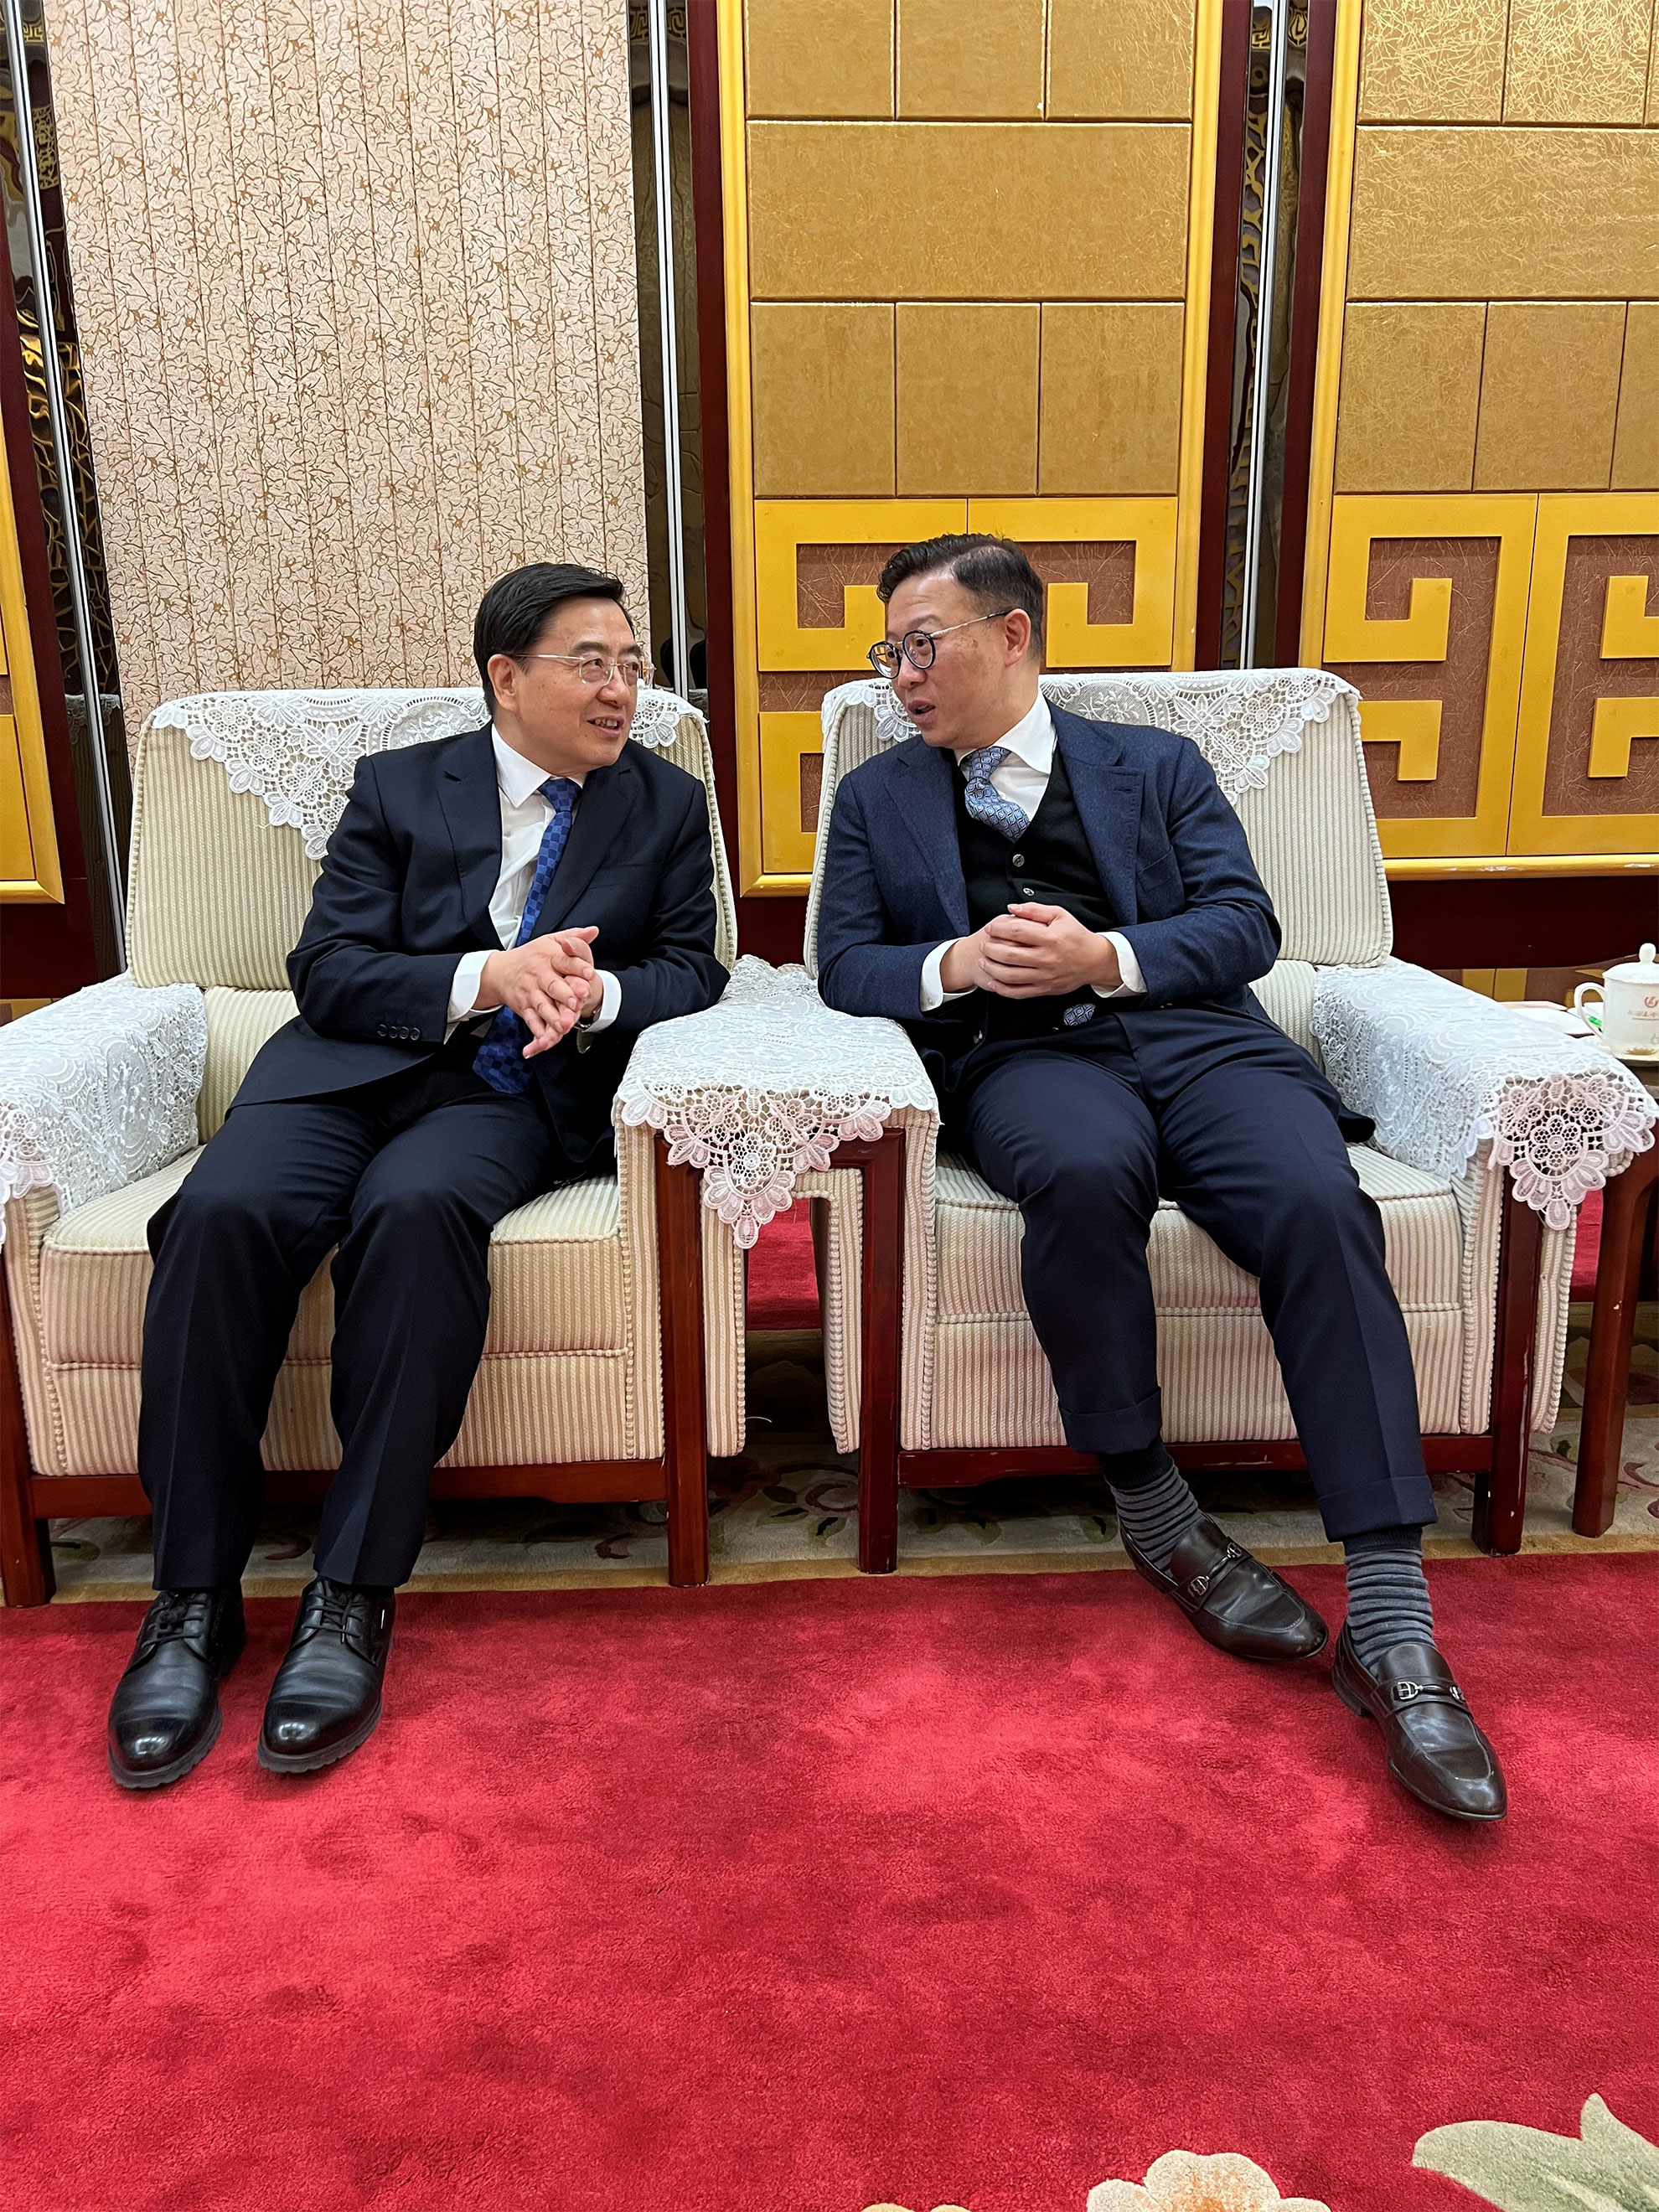 The Deputy Secretary for Justice, Mr Cheung Kwok-kwan (right), called on the member of the Standing Committee of the CPC Xinjiang Uyghur Autonomous Regional Committee and the Executive Vice Chairman of the People's Government of Xinjiang Uyghur Autonomous Region, Mr Chen Weijun (left), in Xinjiang today (January 22).